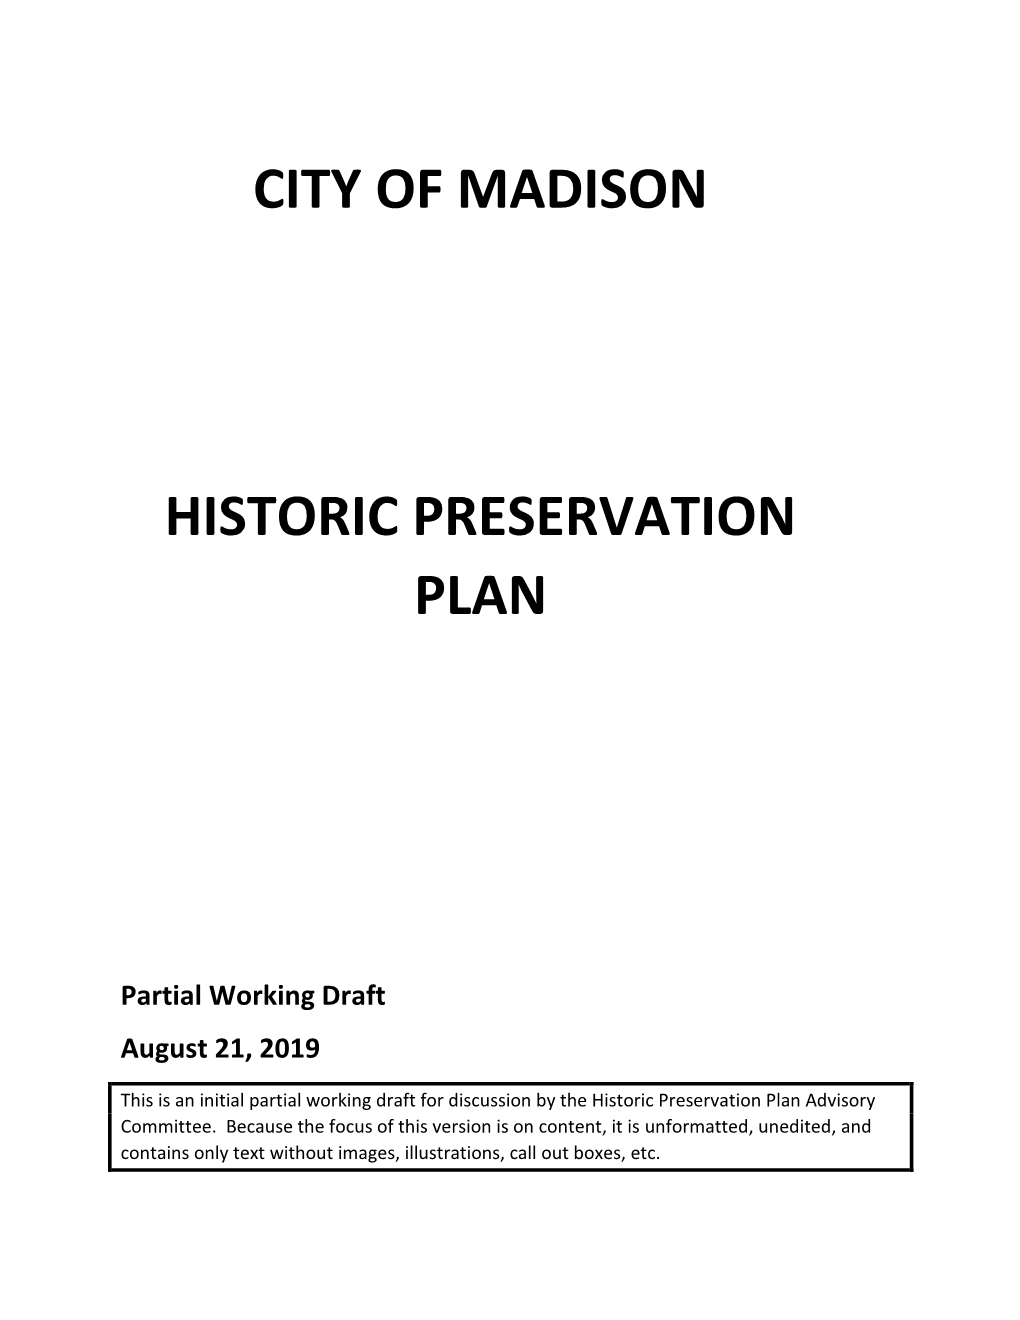 City of Madison Historic Preservation Plan Advisory Committee Held Its First Meeting on Monday, February 26, 2018 at Goodman Community Center